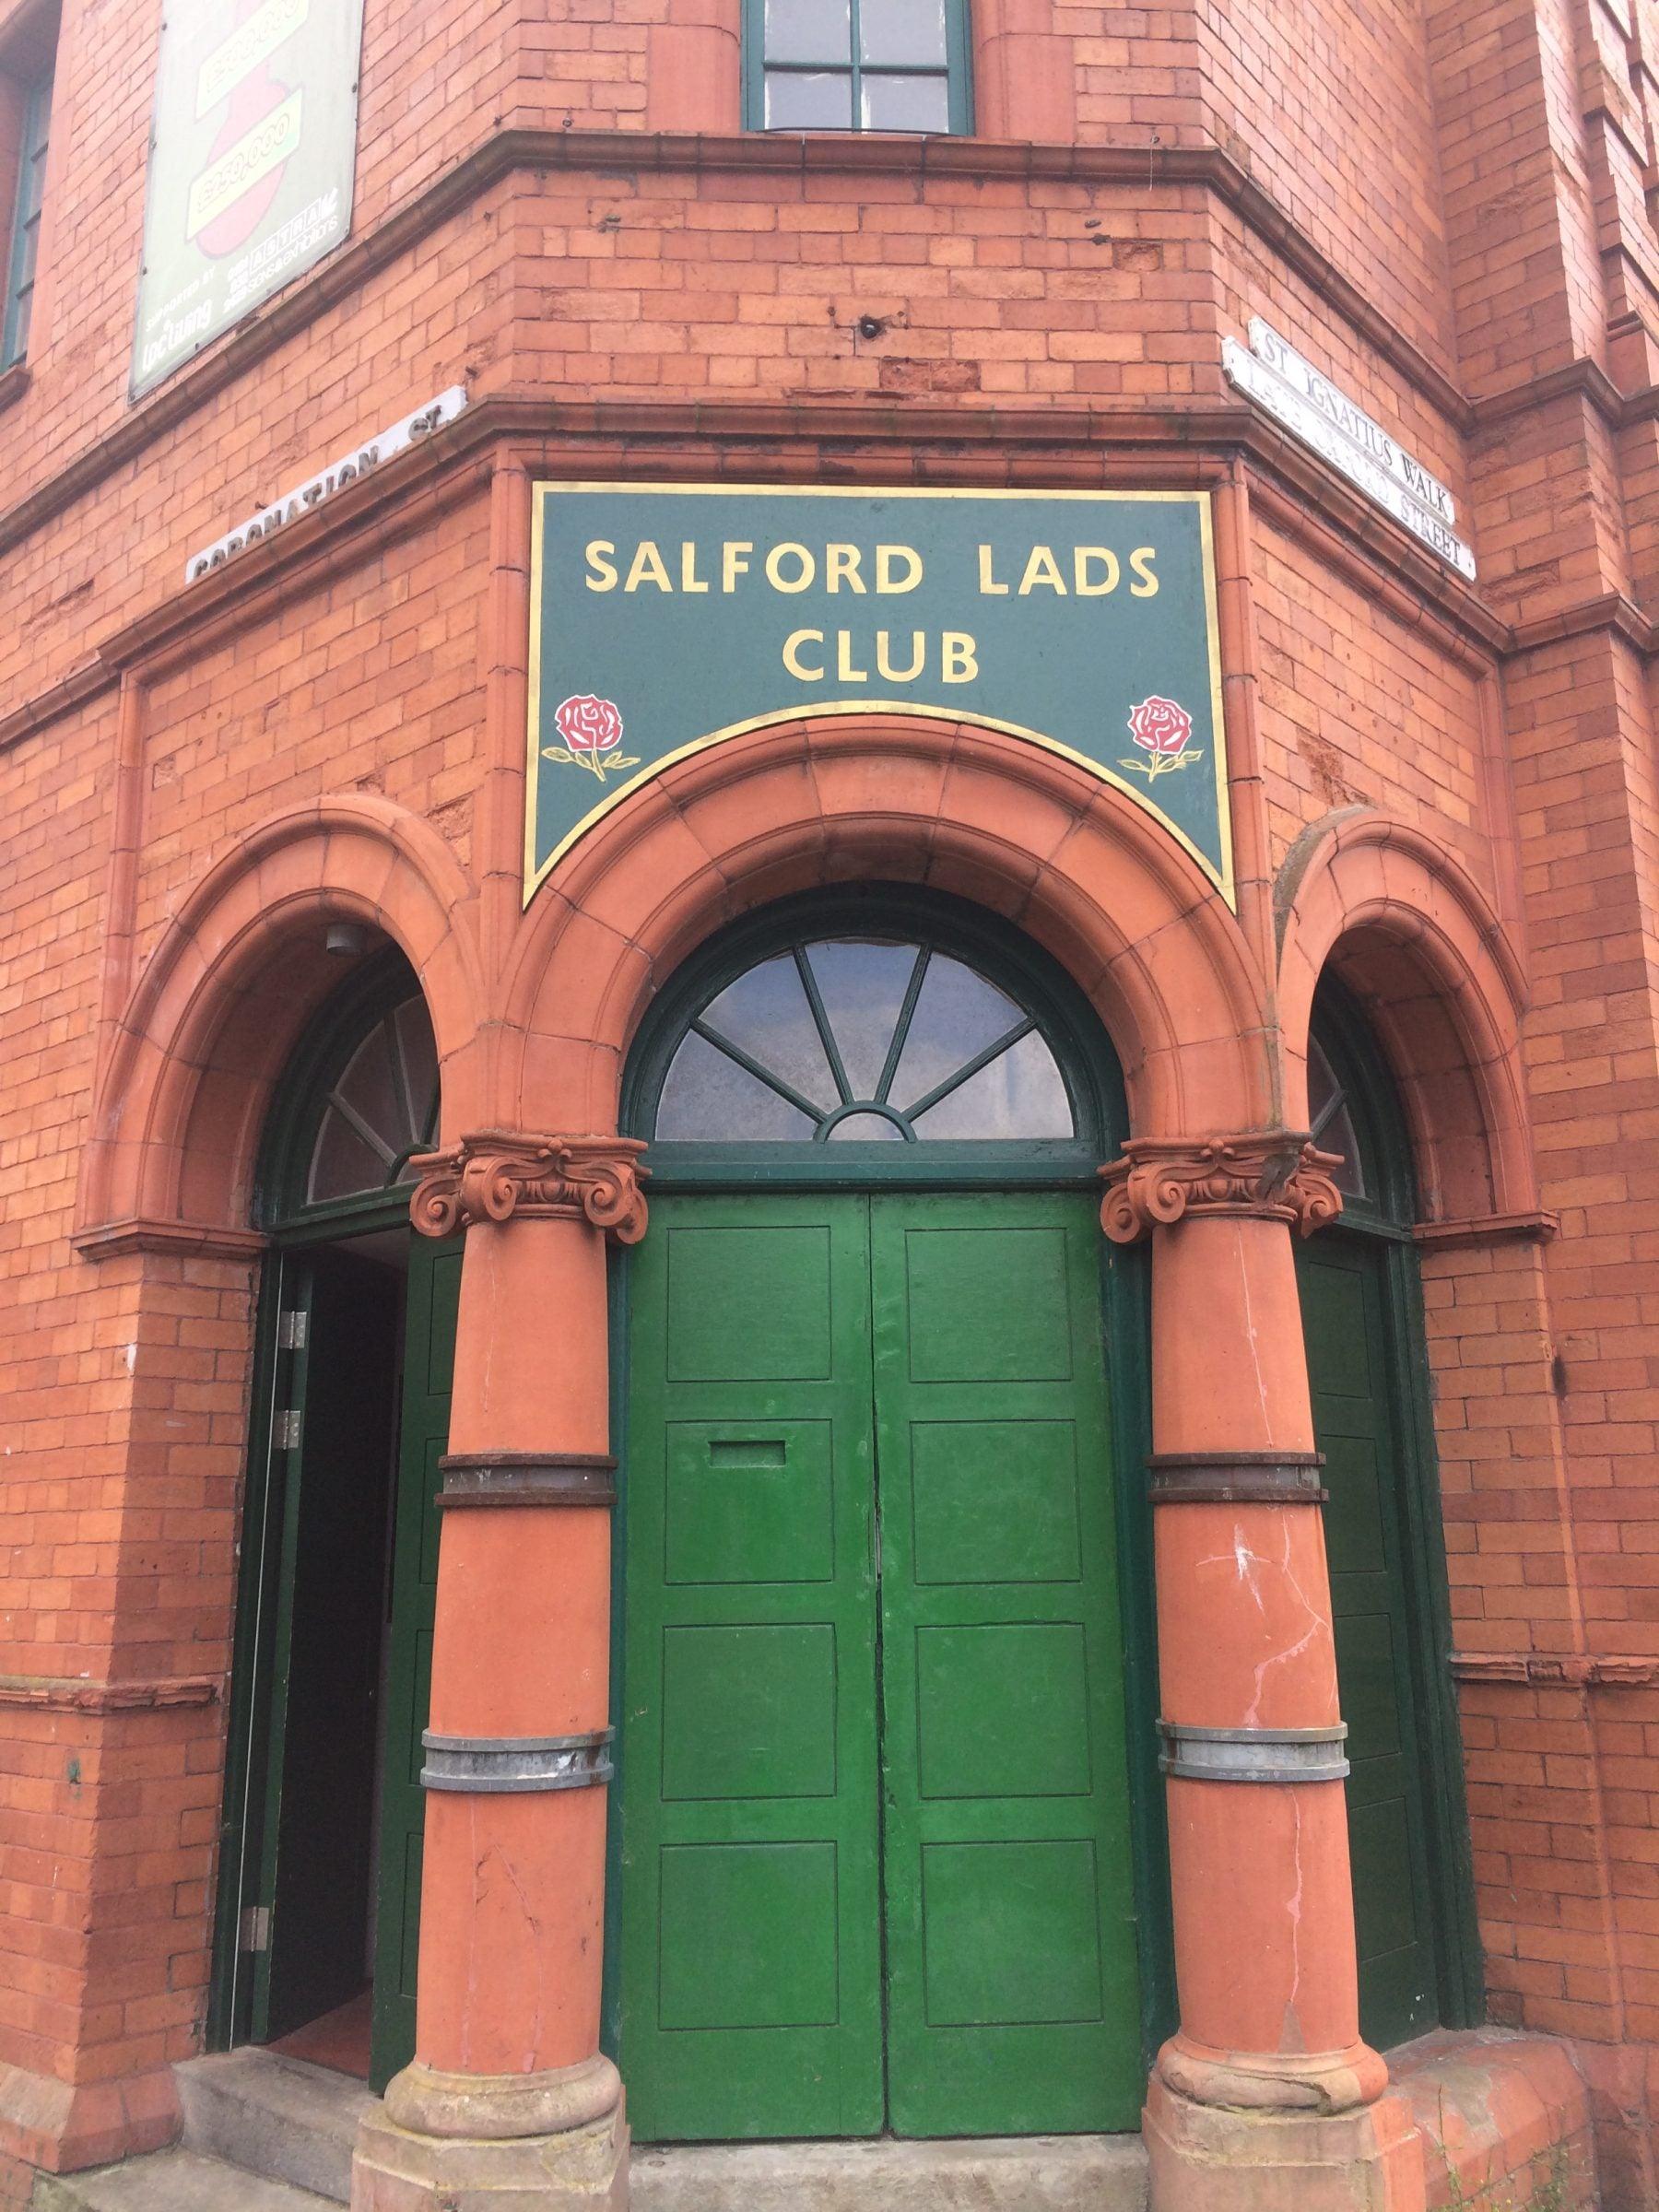 SALFORD LADS: Sweatshirt Inspired by The Smiths & Football (10% to Salford Lads) - SOUND IS COLOUR